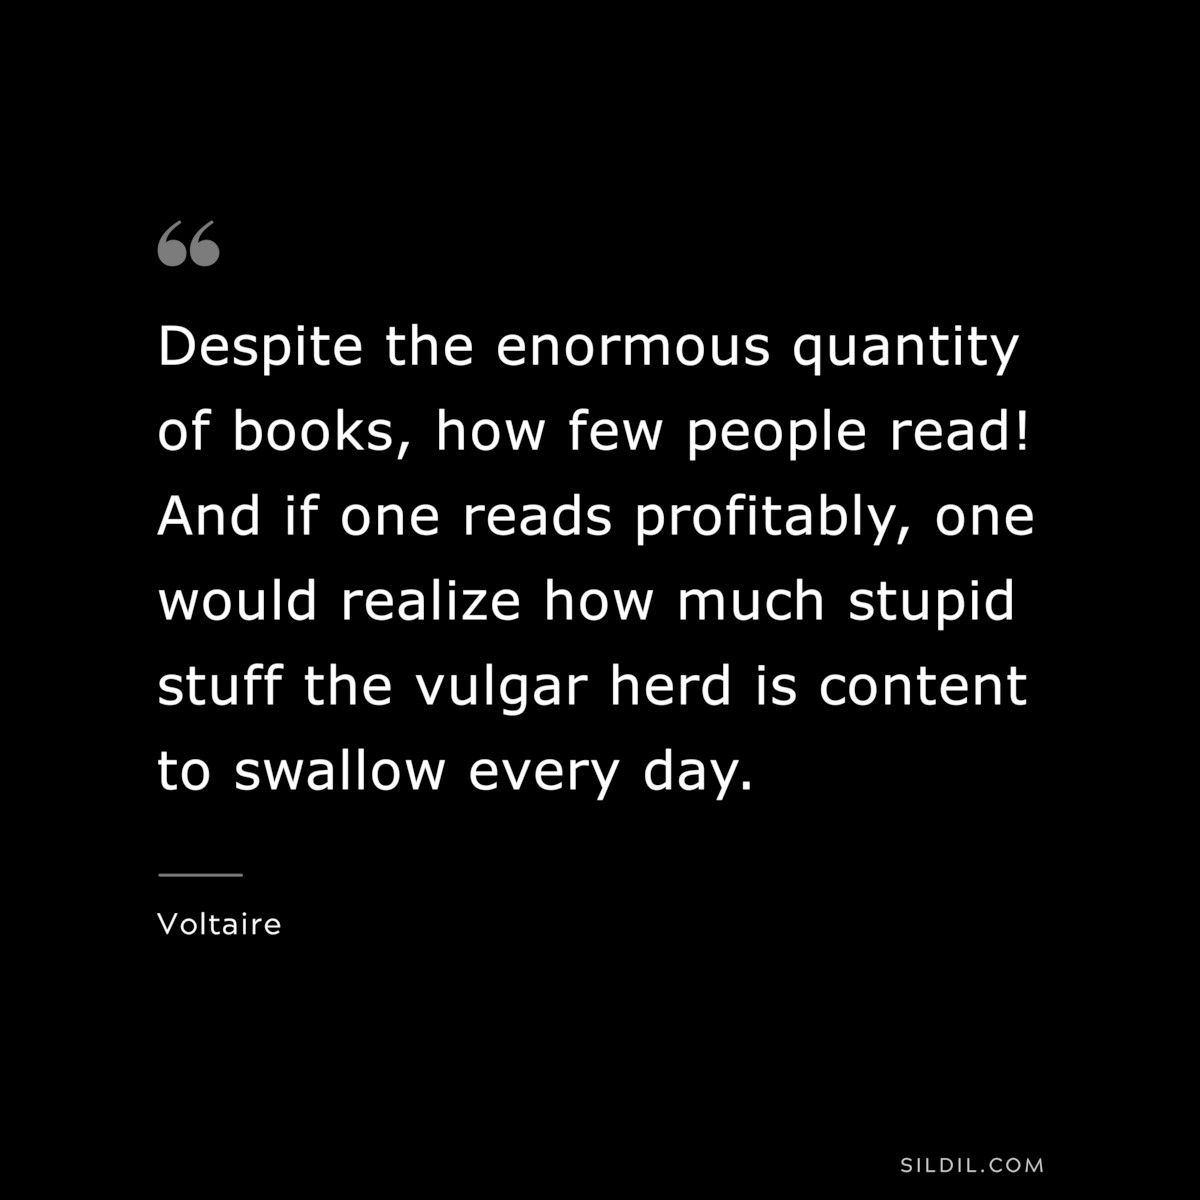 Despite the enormous quantity of books, how few people read! And if one reads profitably, one would realize how much stupid stuff the vulgar herd is content to swallow every day. ― Voltaire